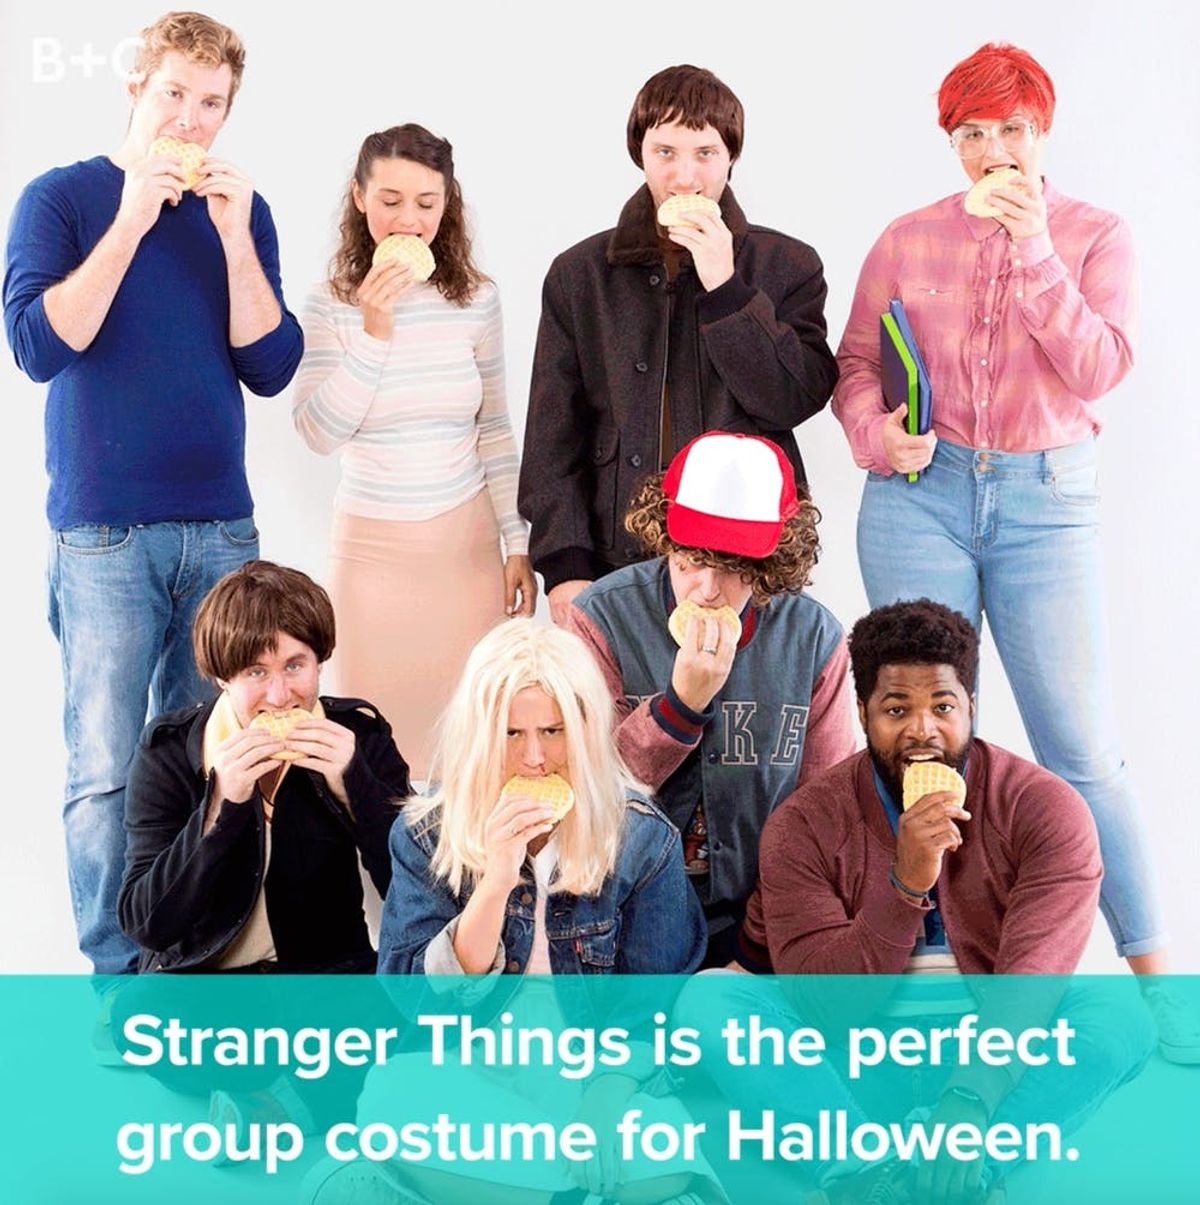 Keep Halloween Strange With This ‘Stranger Things’ Group Costume